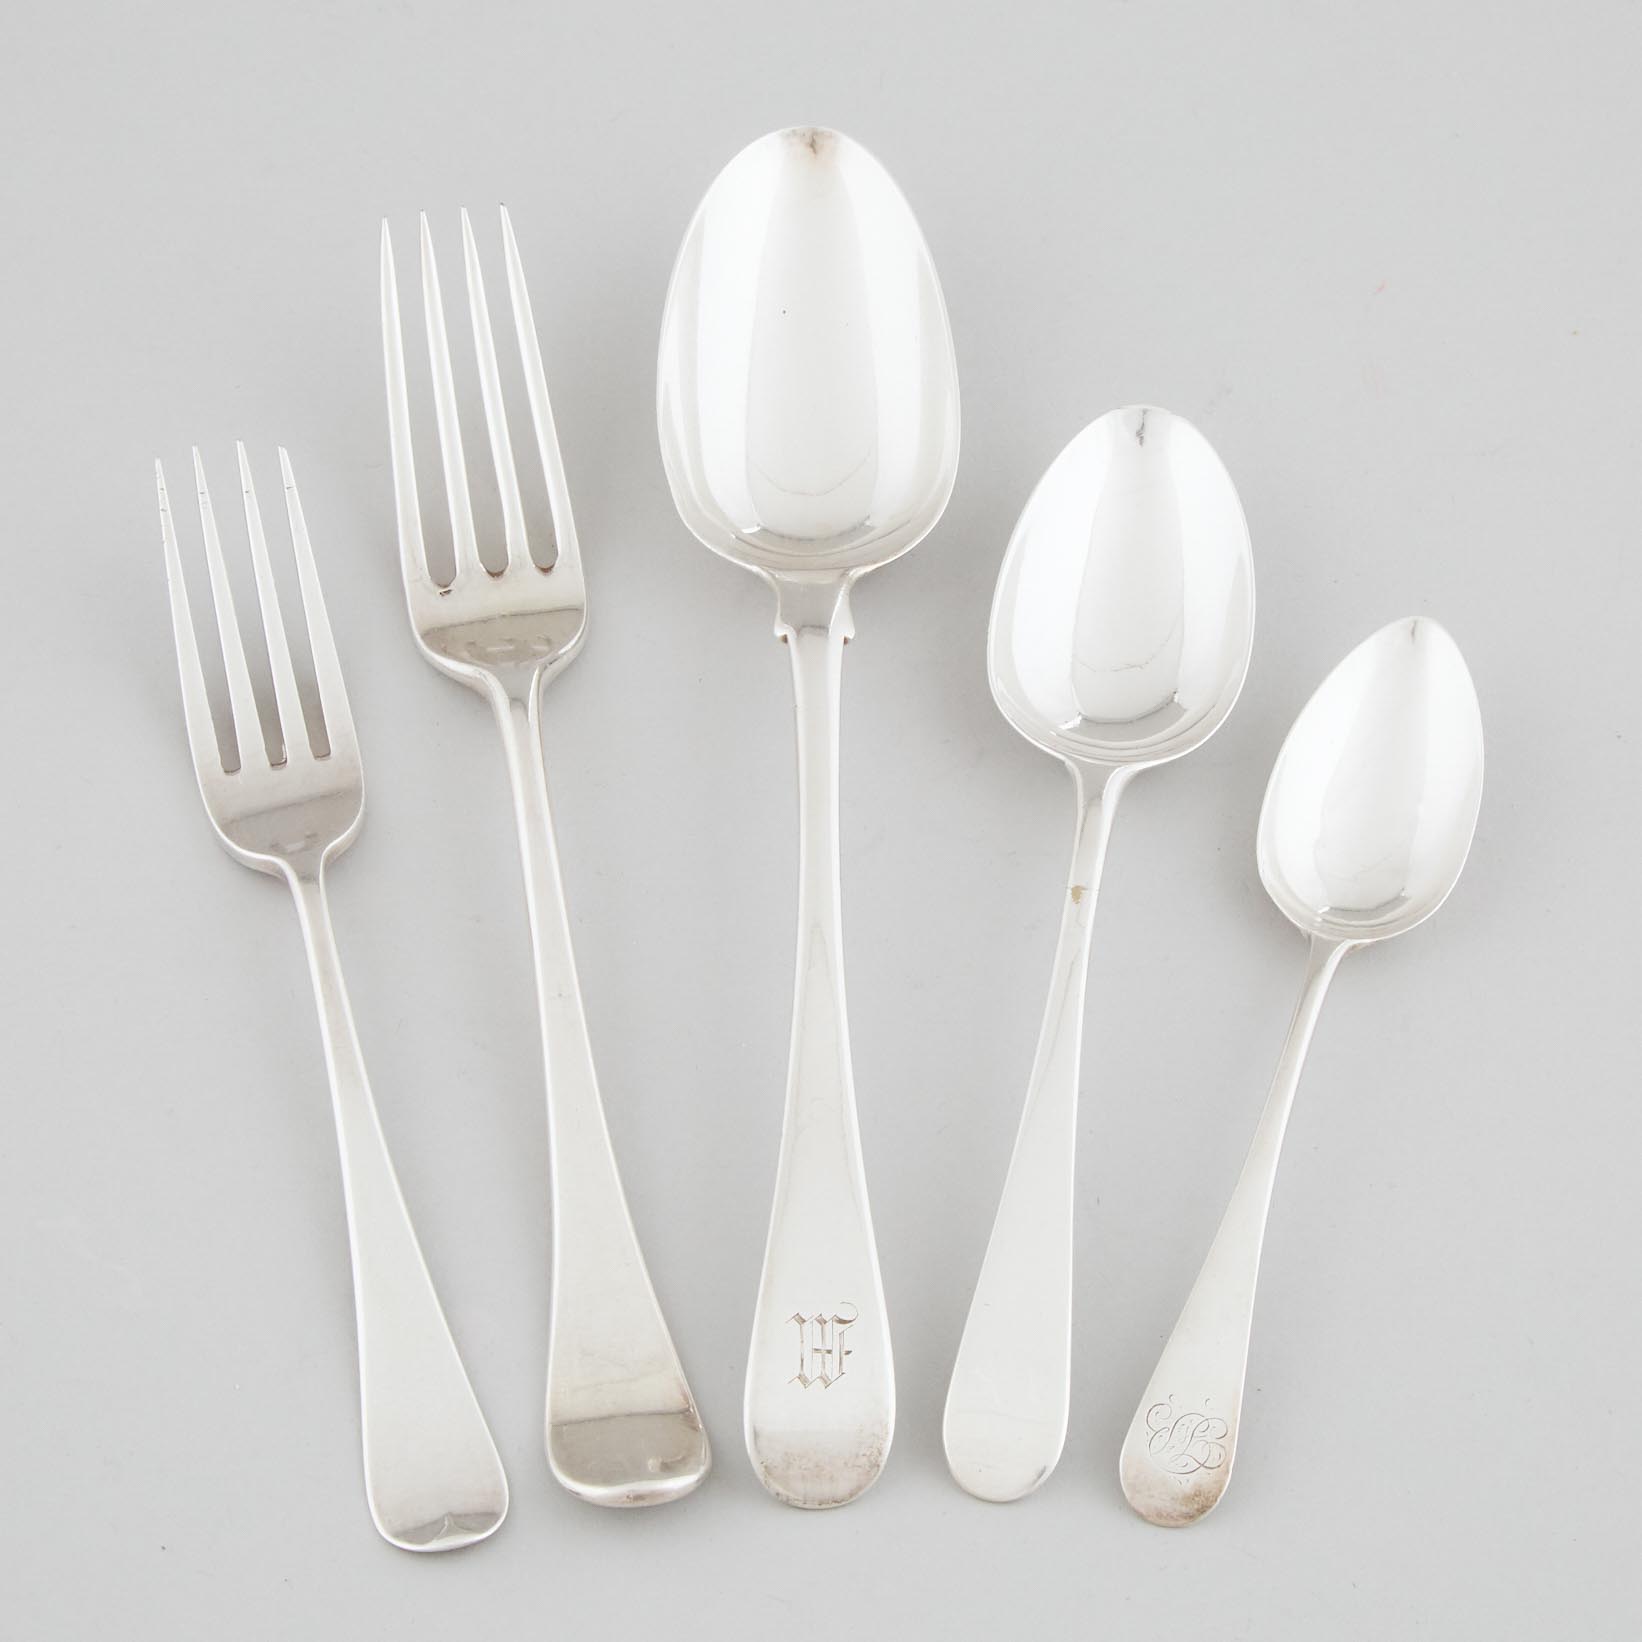 Assembled George III Silver Old English Pattern Flatware Service, London, c.1766-1816